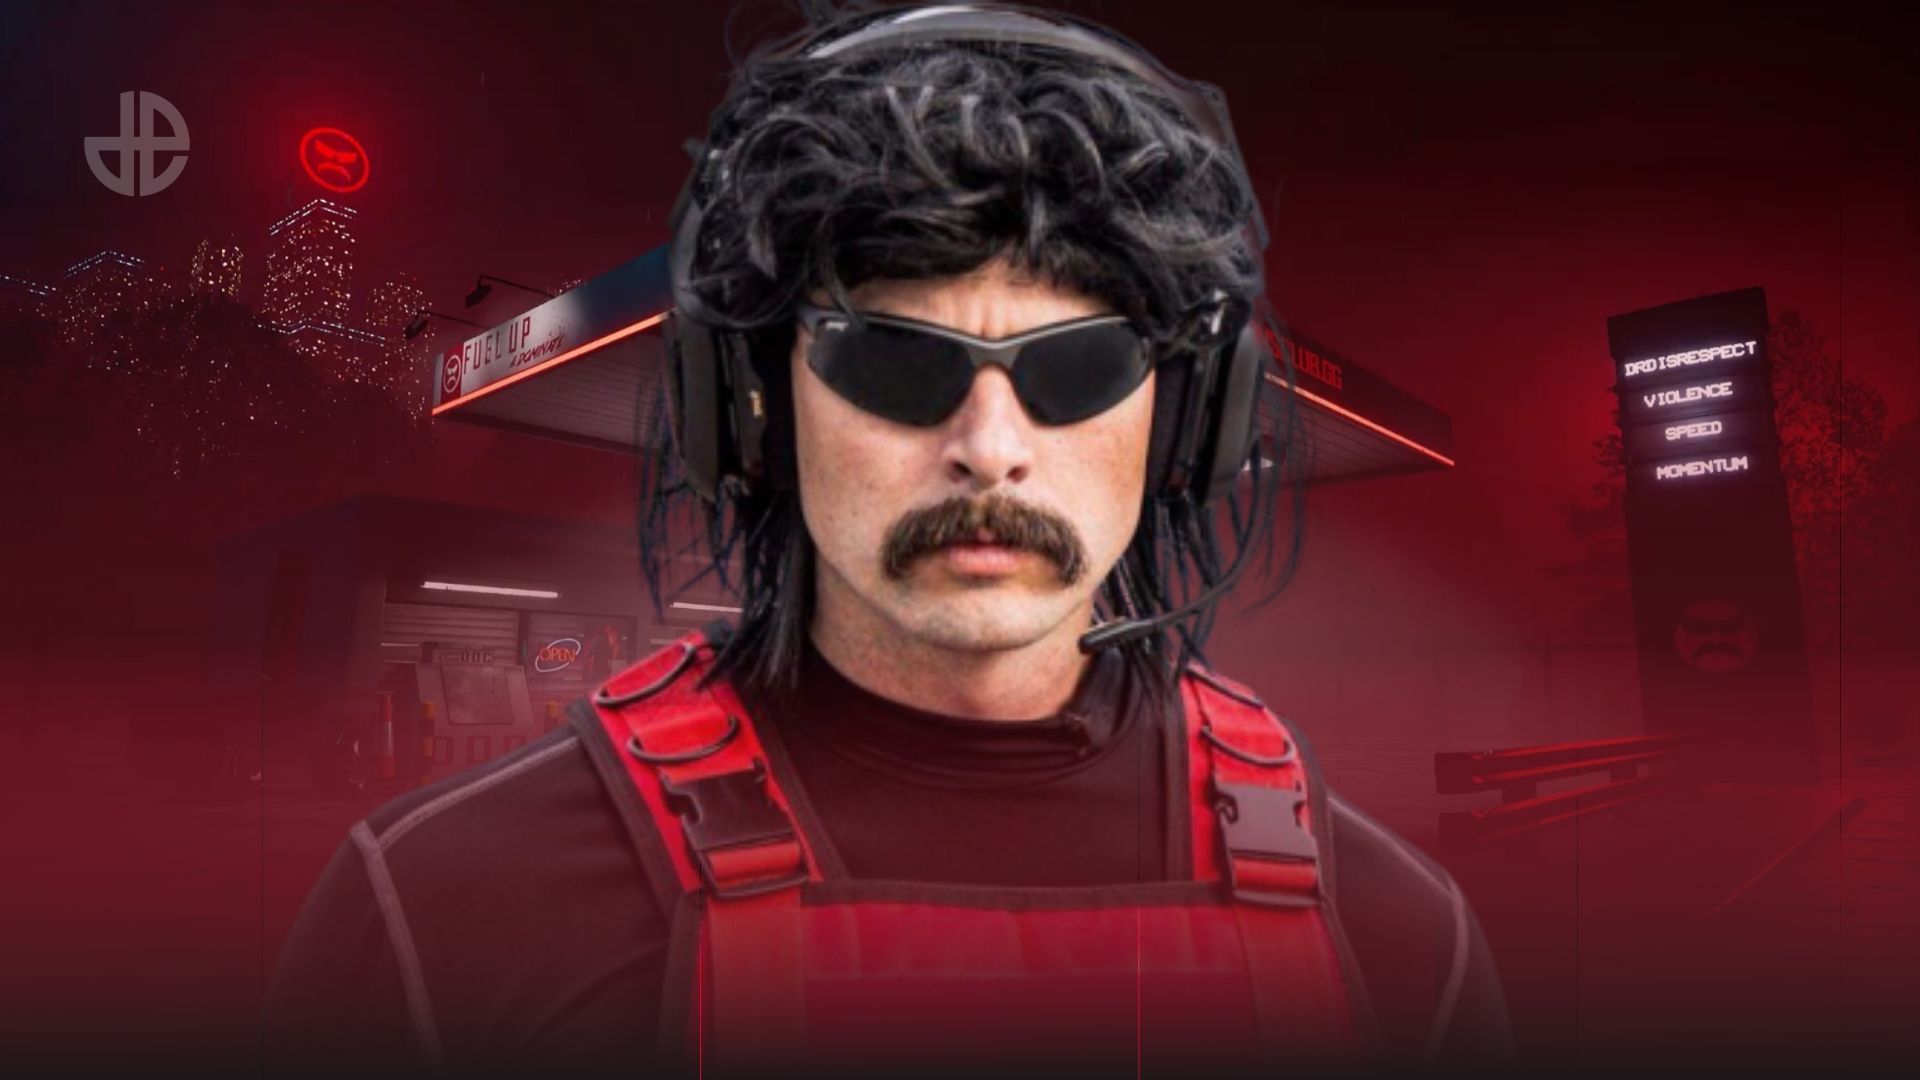 Dr Disrespect Stickers for Sale | TeePublic